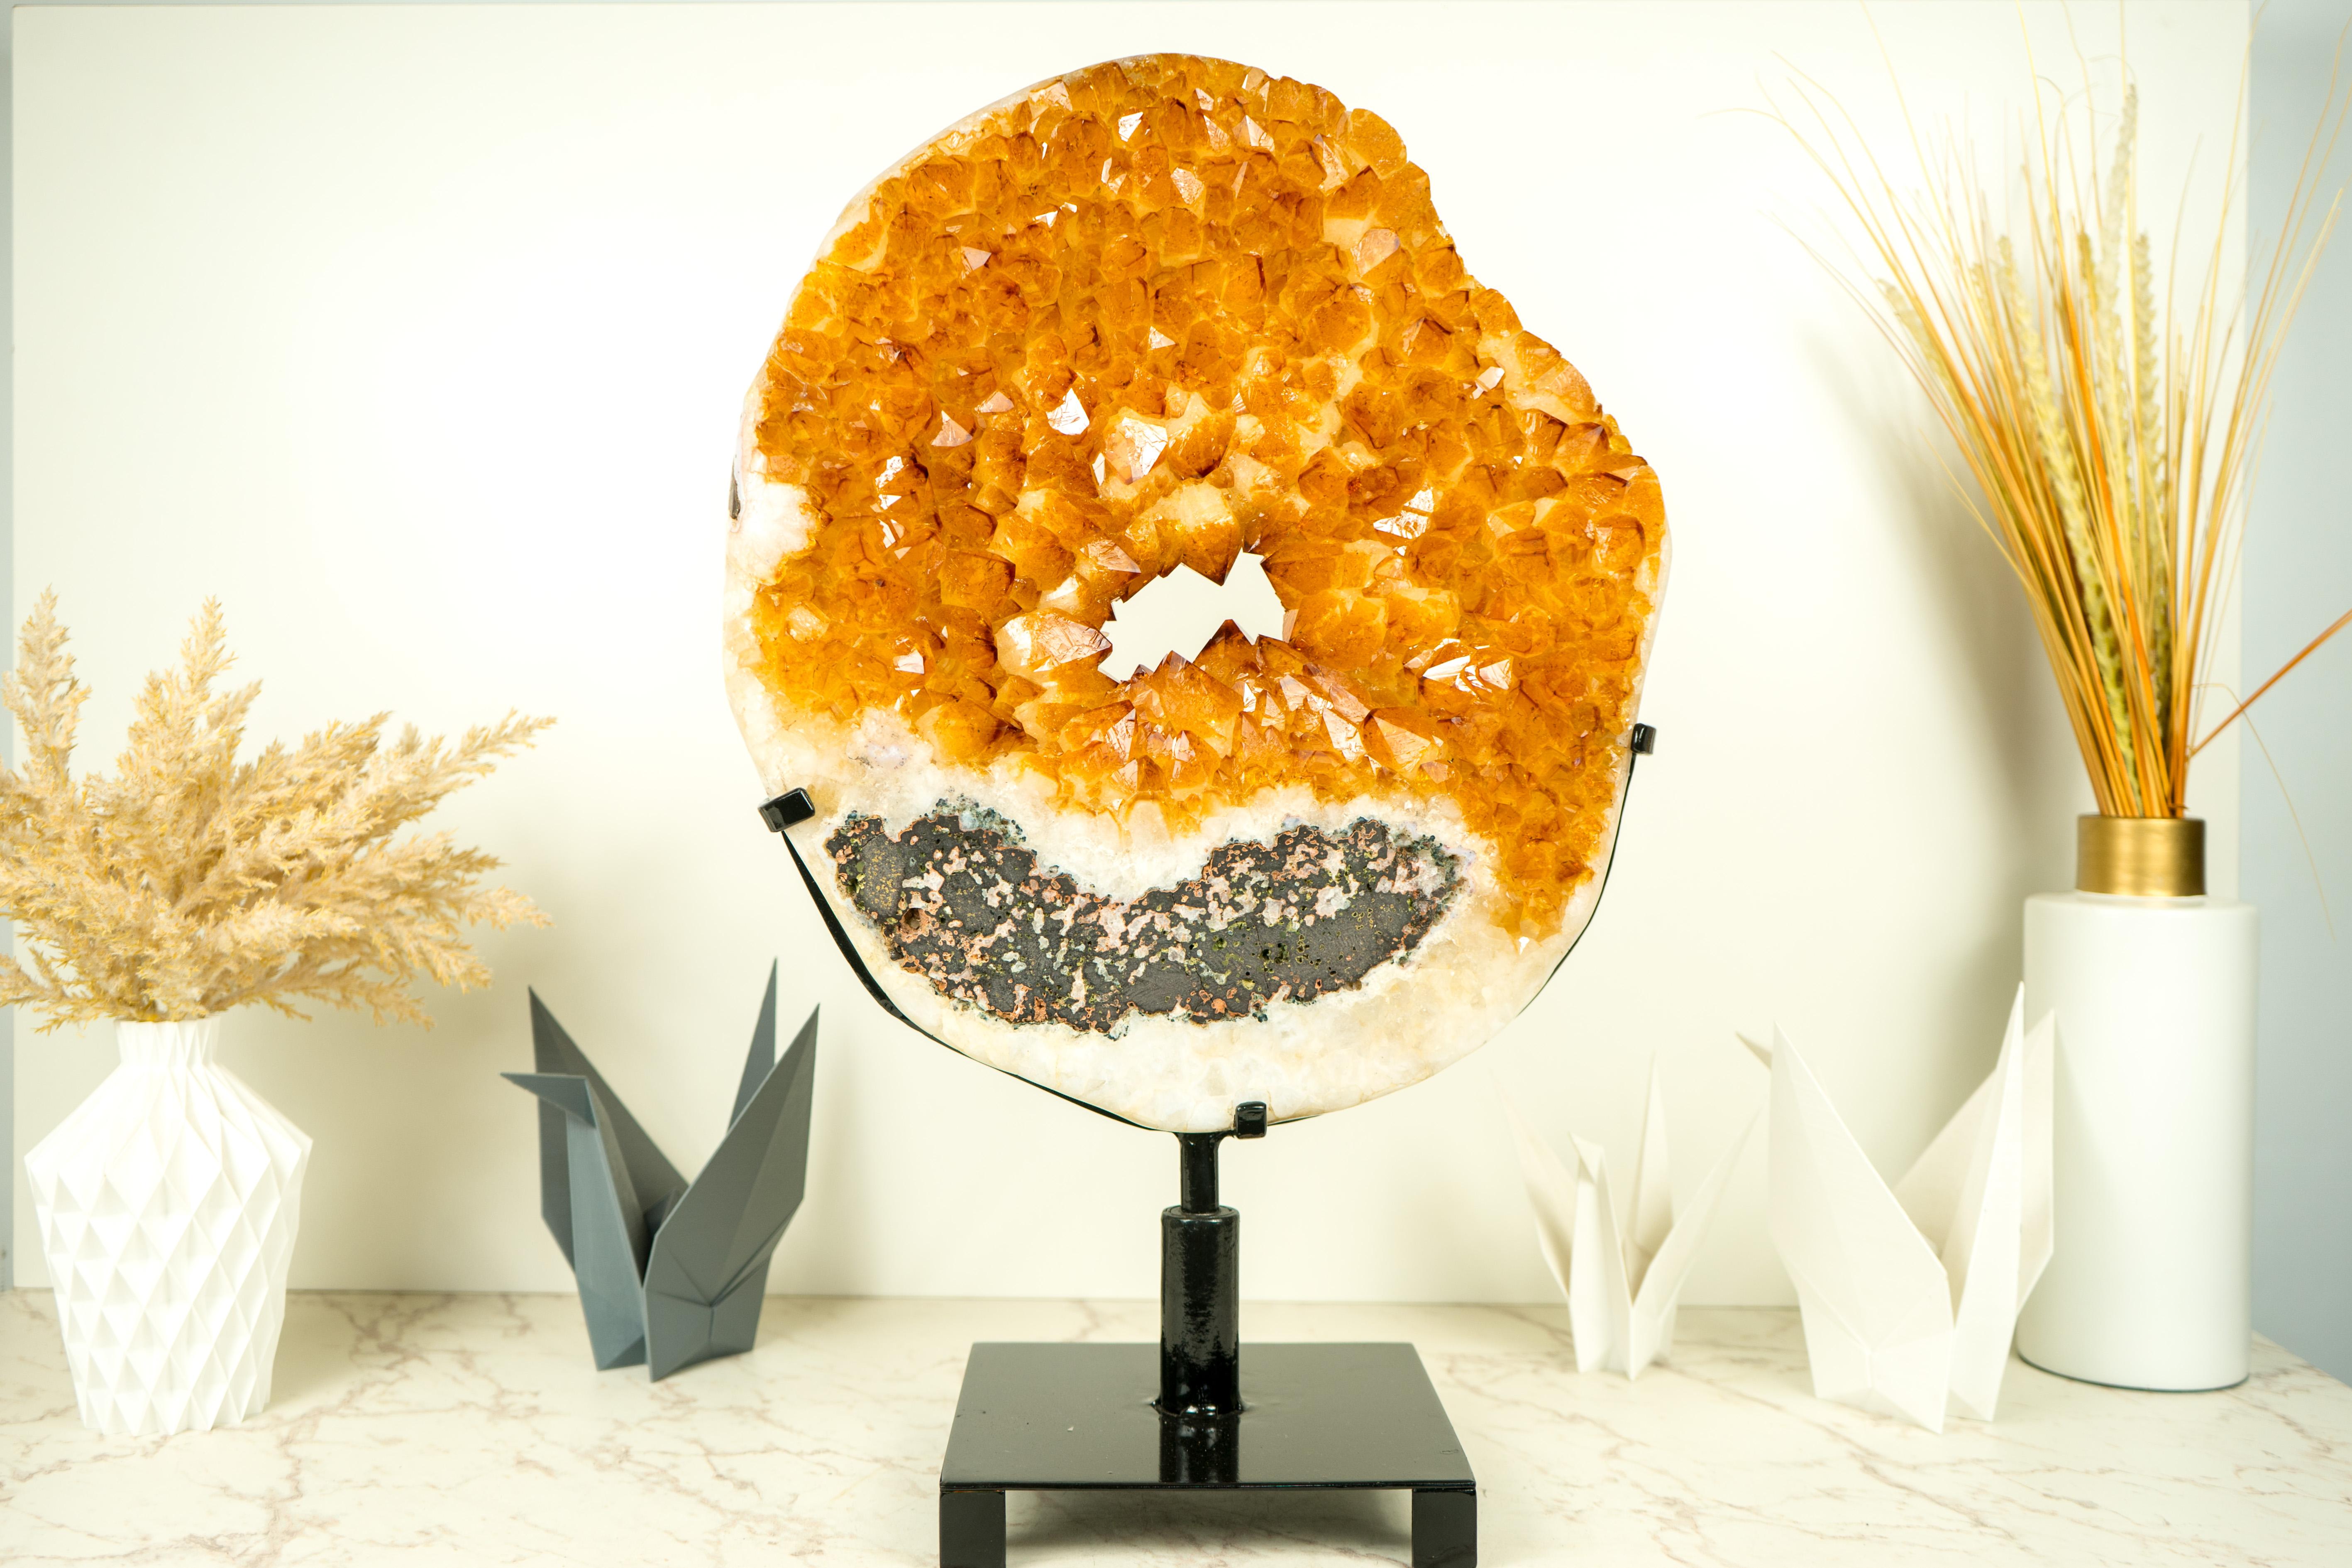 Large Citrine Geode Portal Slice with a Rare Crown Formation, AAA Golden Orange Citrine on Rotating Stand

▫️ Description

A rare, stunning Citrine Geode Portal, this natural artwork brings world-class aesthetics that match its warm, golden orange